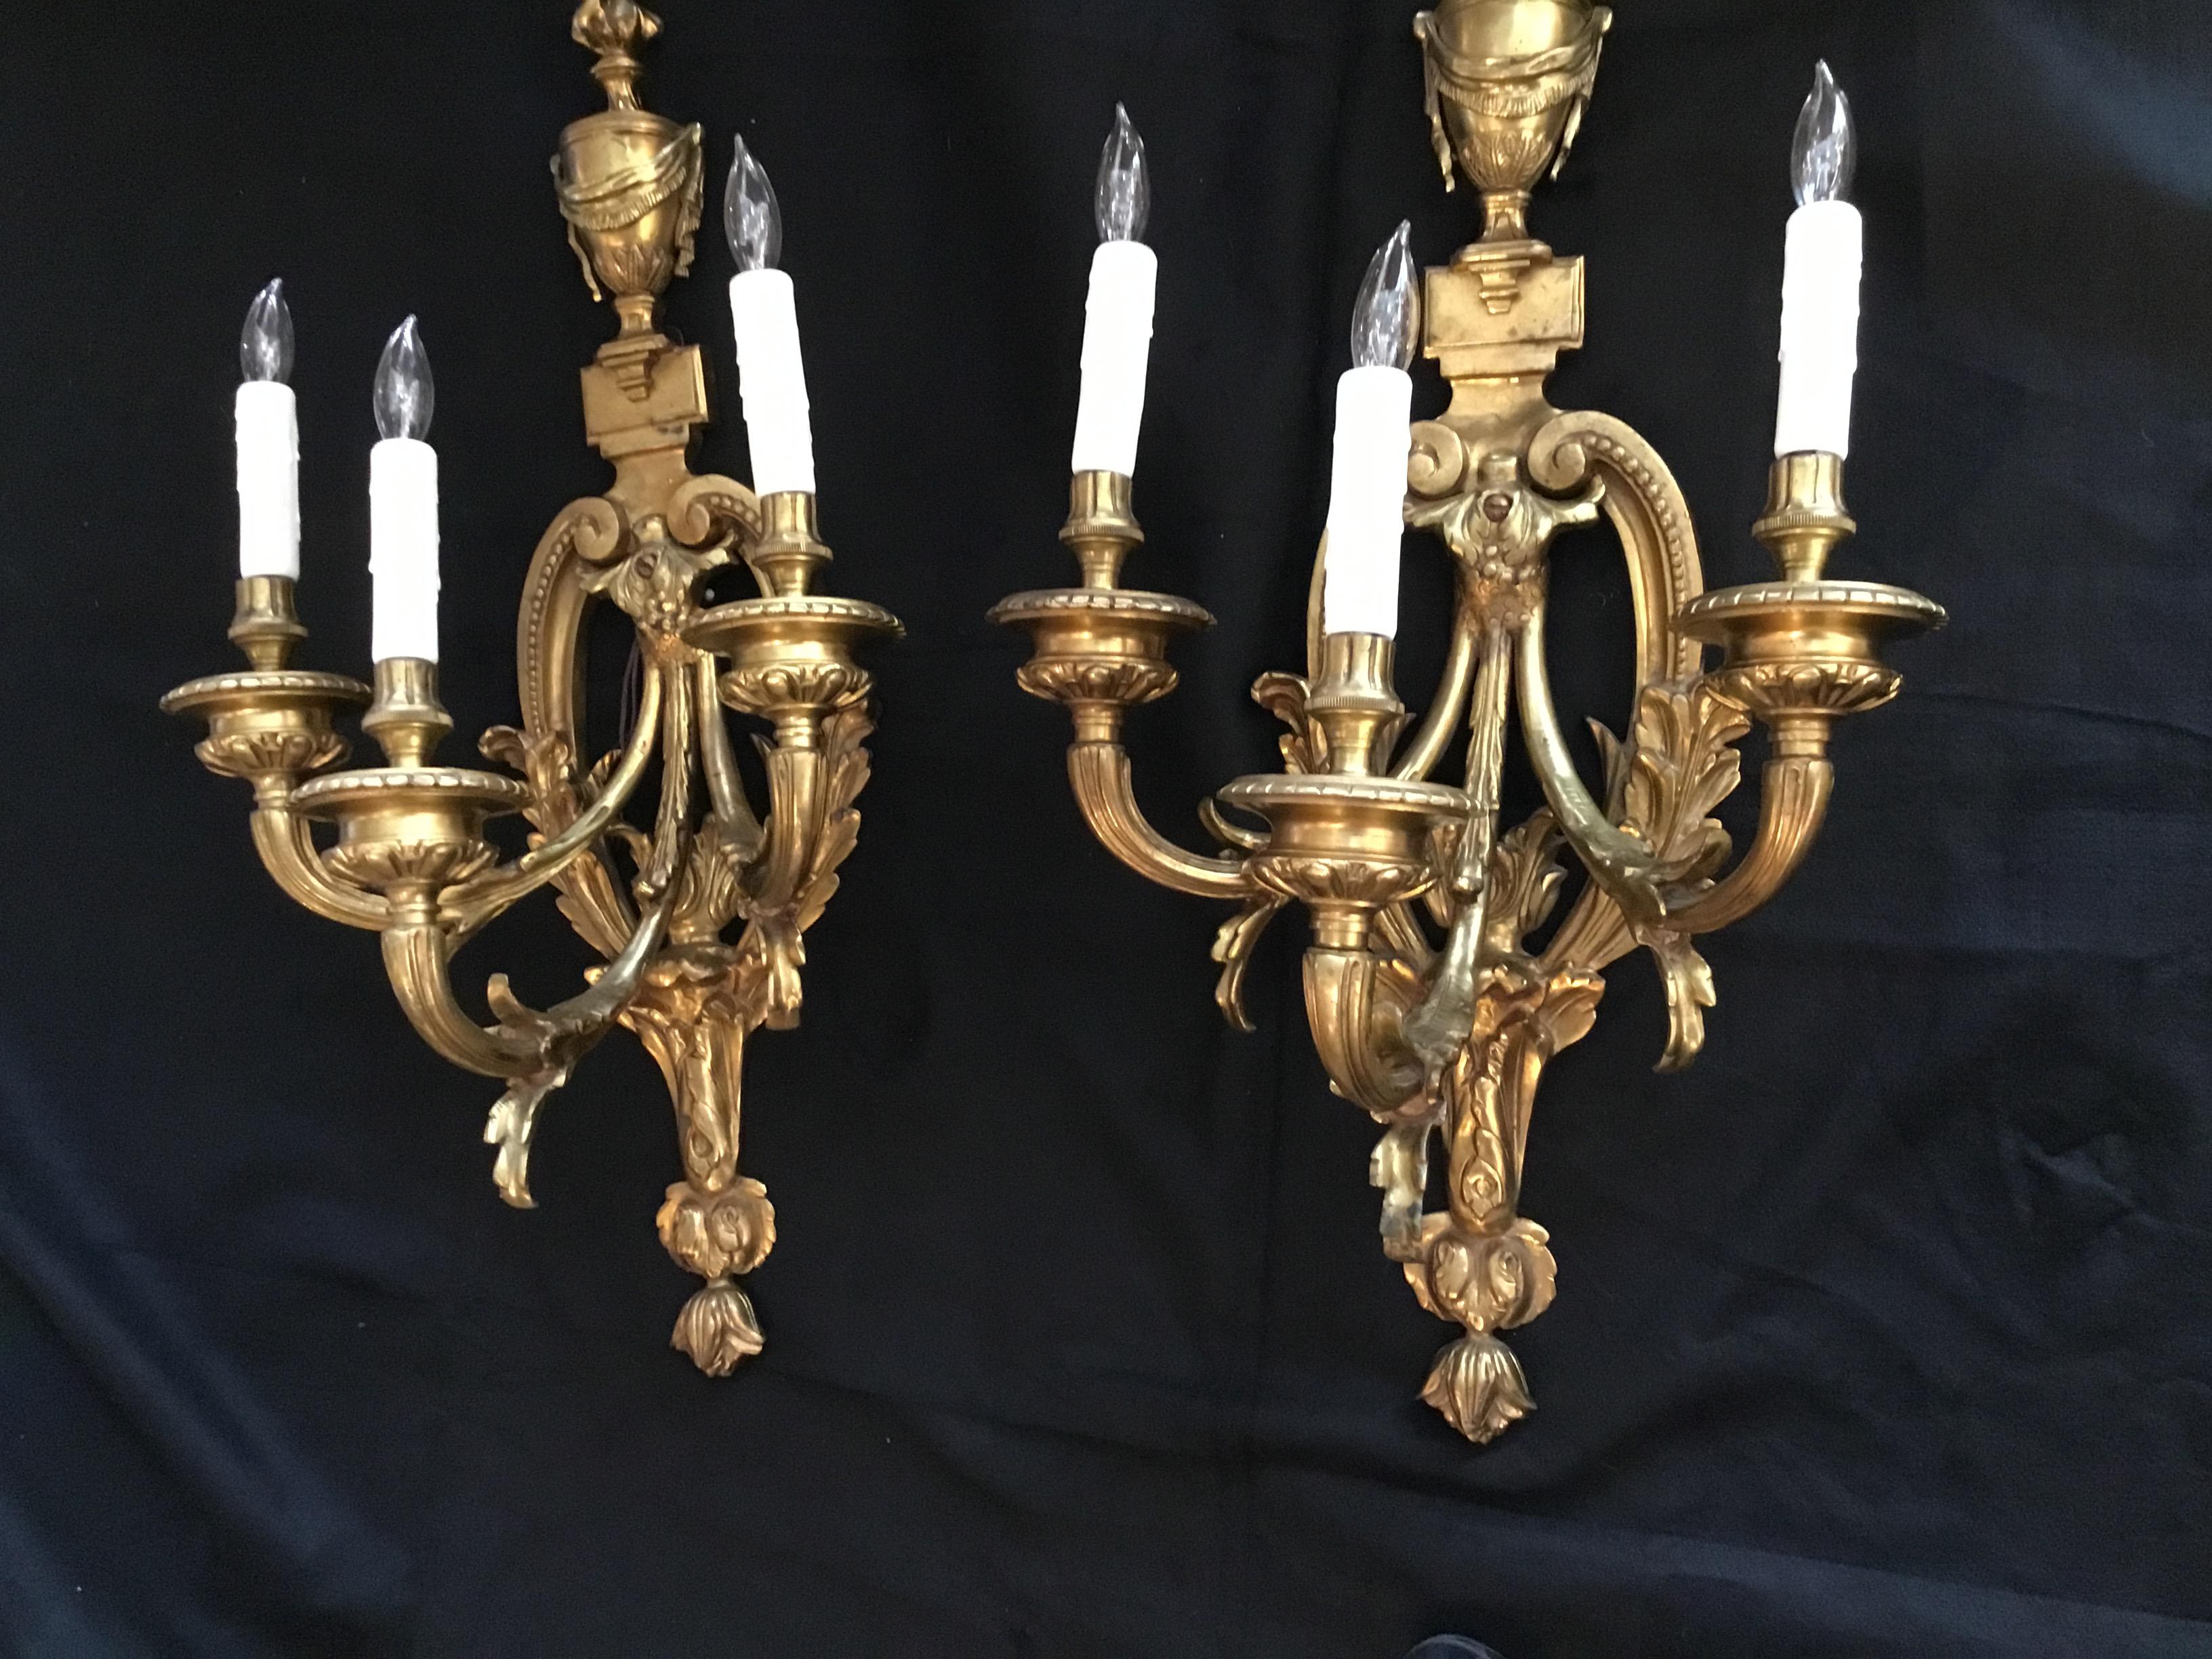 Handsome pair of large and impressive sconces.